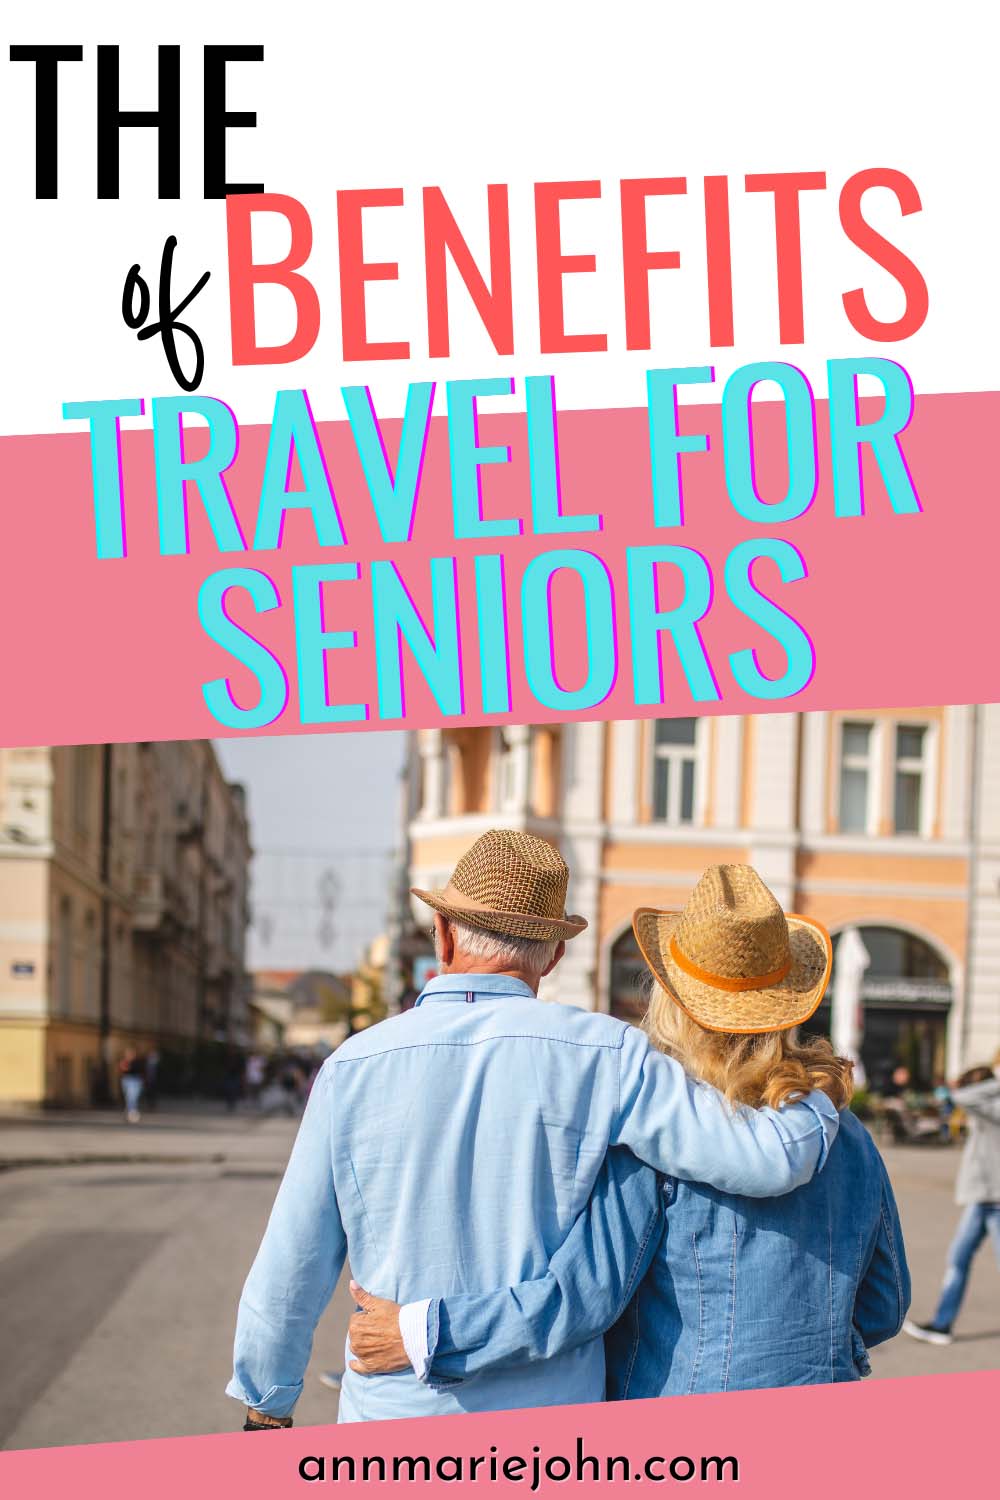 The Benefits of Travel for Seniors